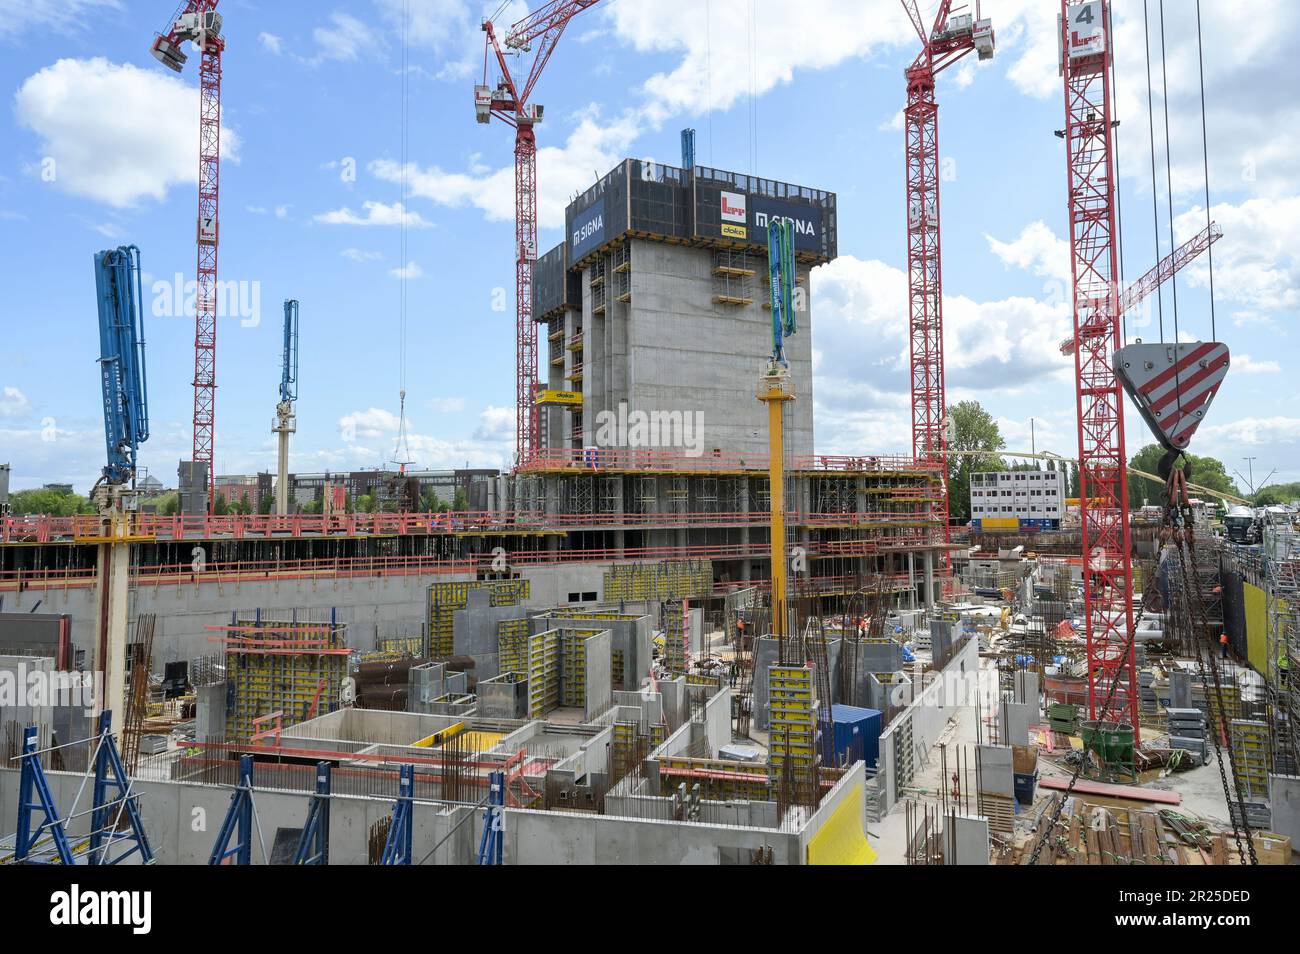 GERMANY, Hamburg, Harbour town, construction site Elb Tower of Signa Holding, financed by Signa Prime Selection AG, company of Signa Holding, Signa Holding was founded by Austrian real estate developer René Benko , also owner of Karstadt Kaufhaus Stock Photo